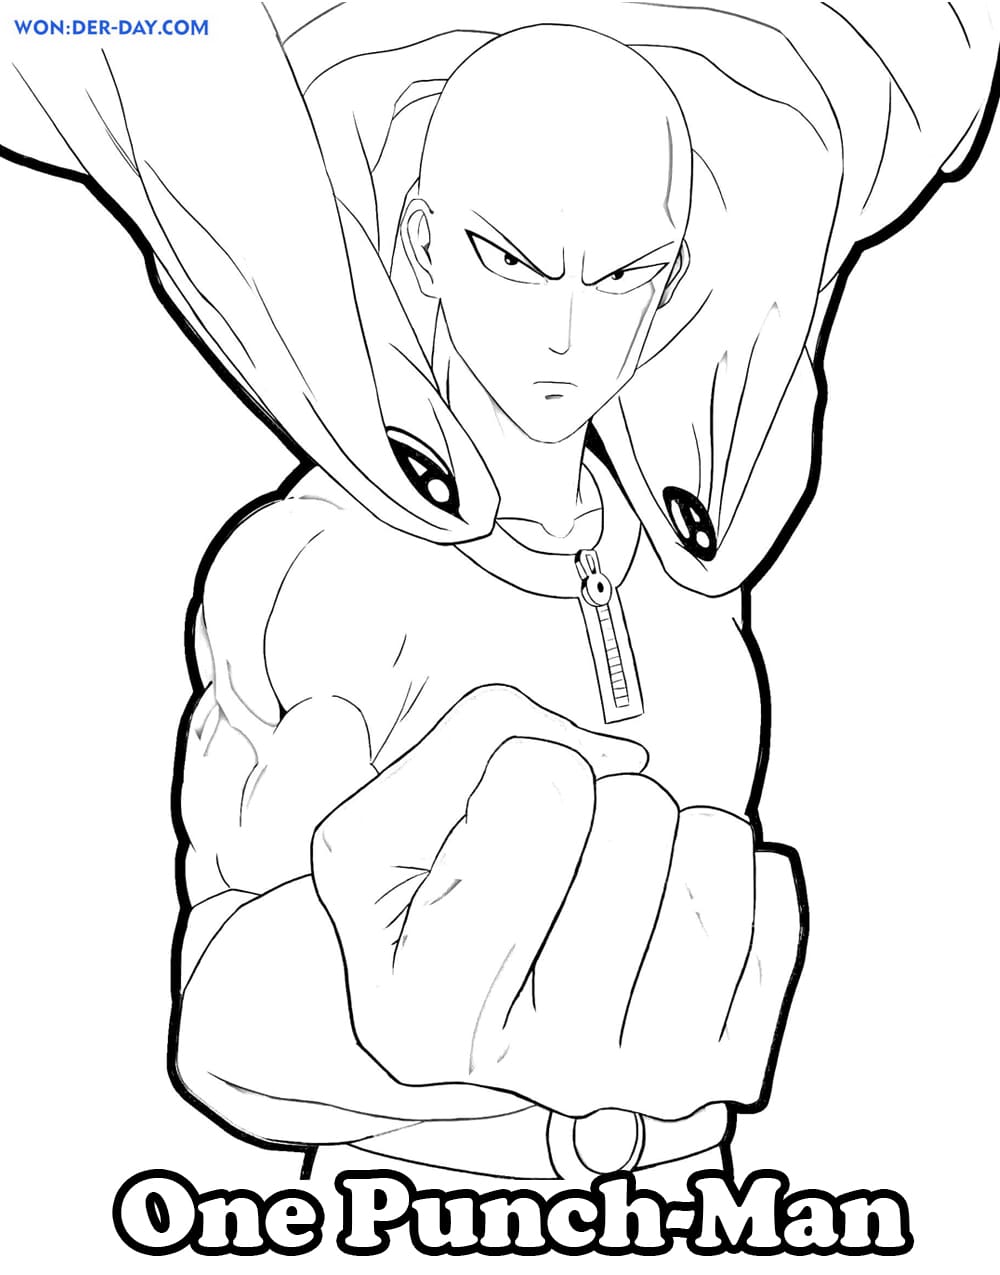 One Punch Man Coloring Page One Punch Man Coloring Pa - vrogue.co